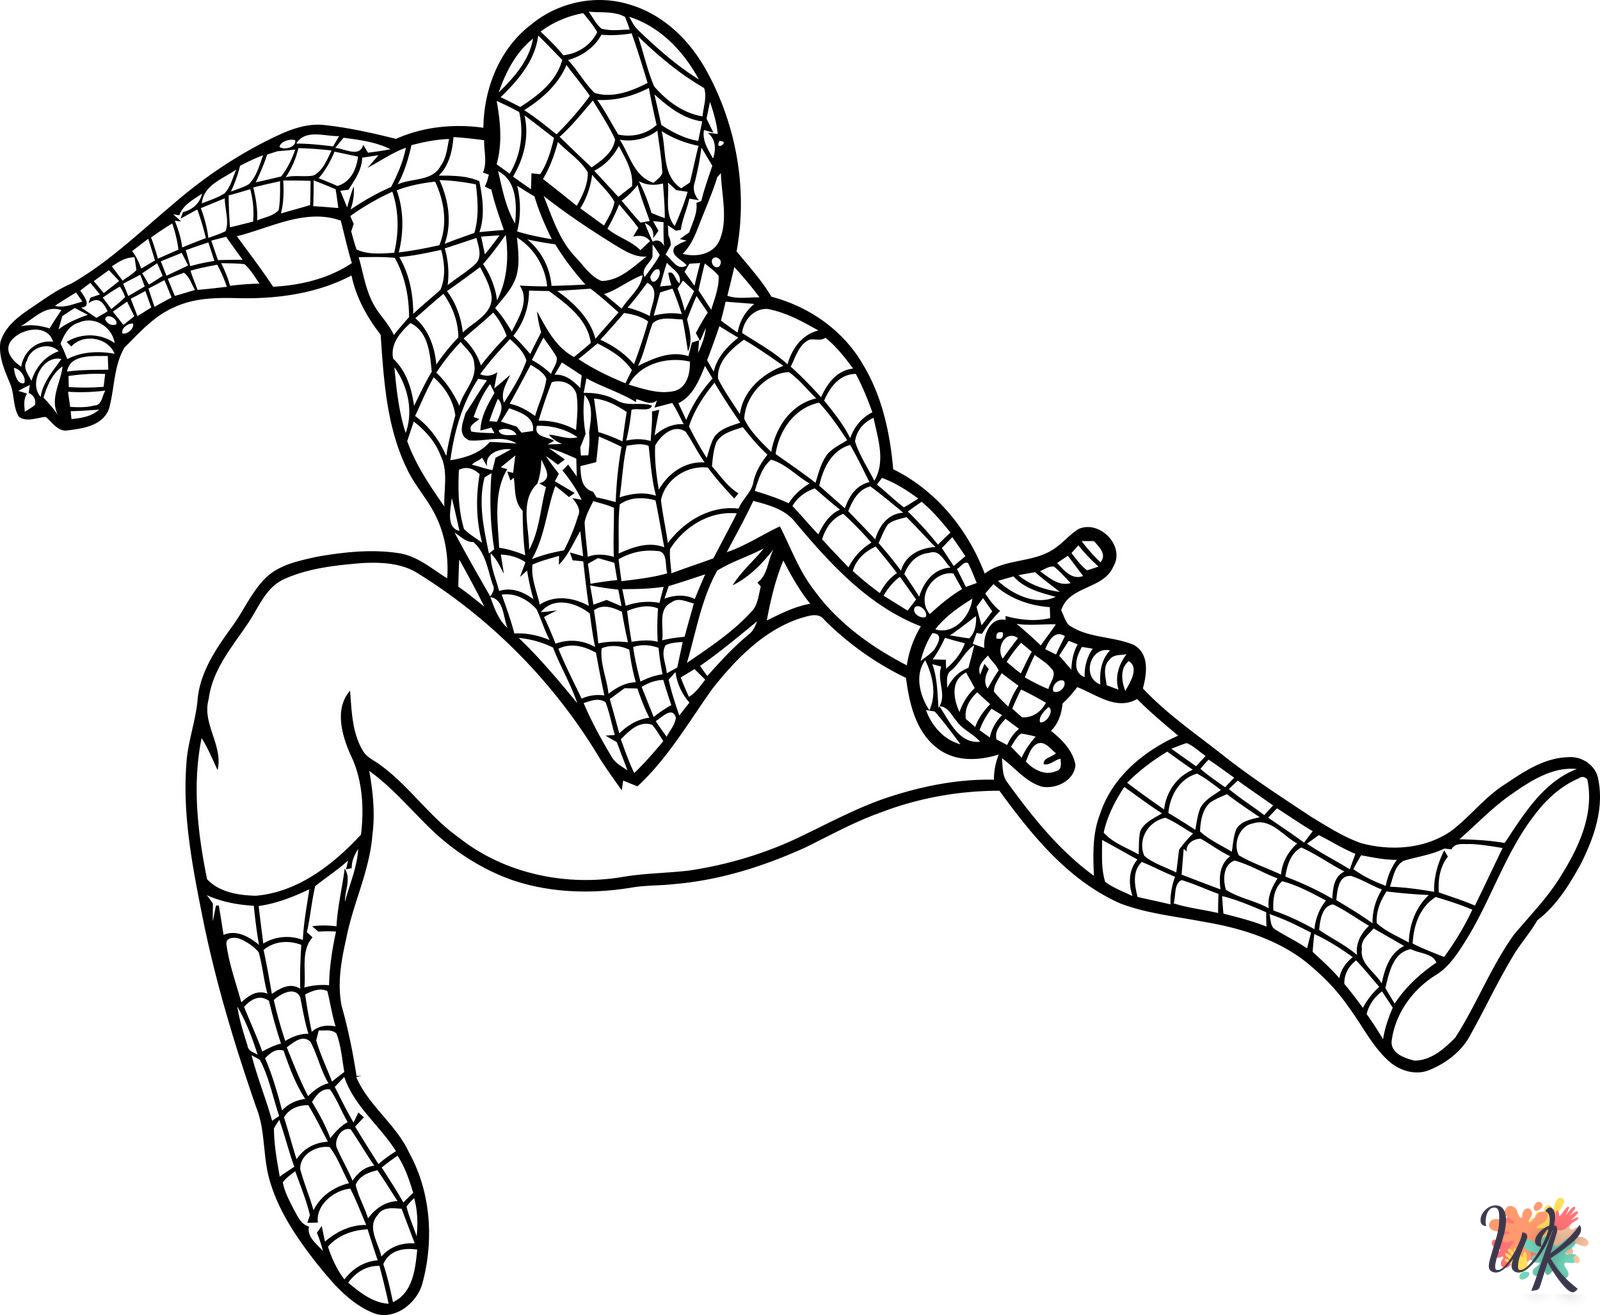 Superhero coloring book pages